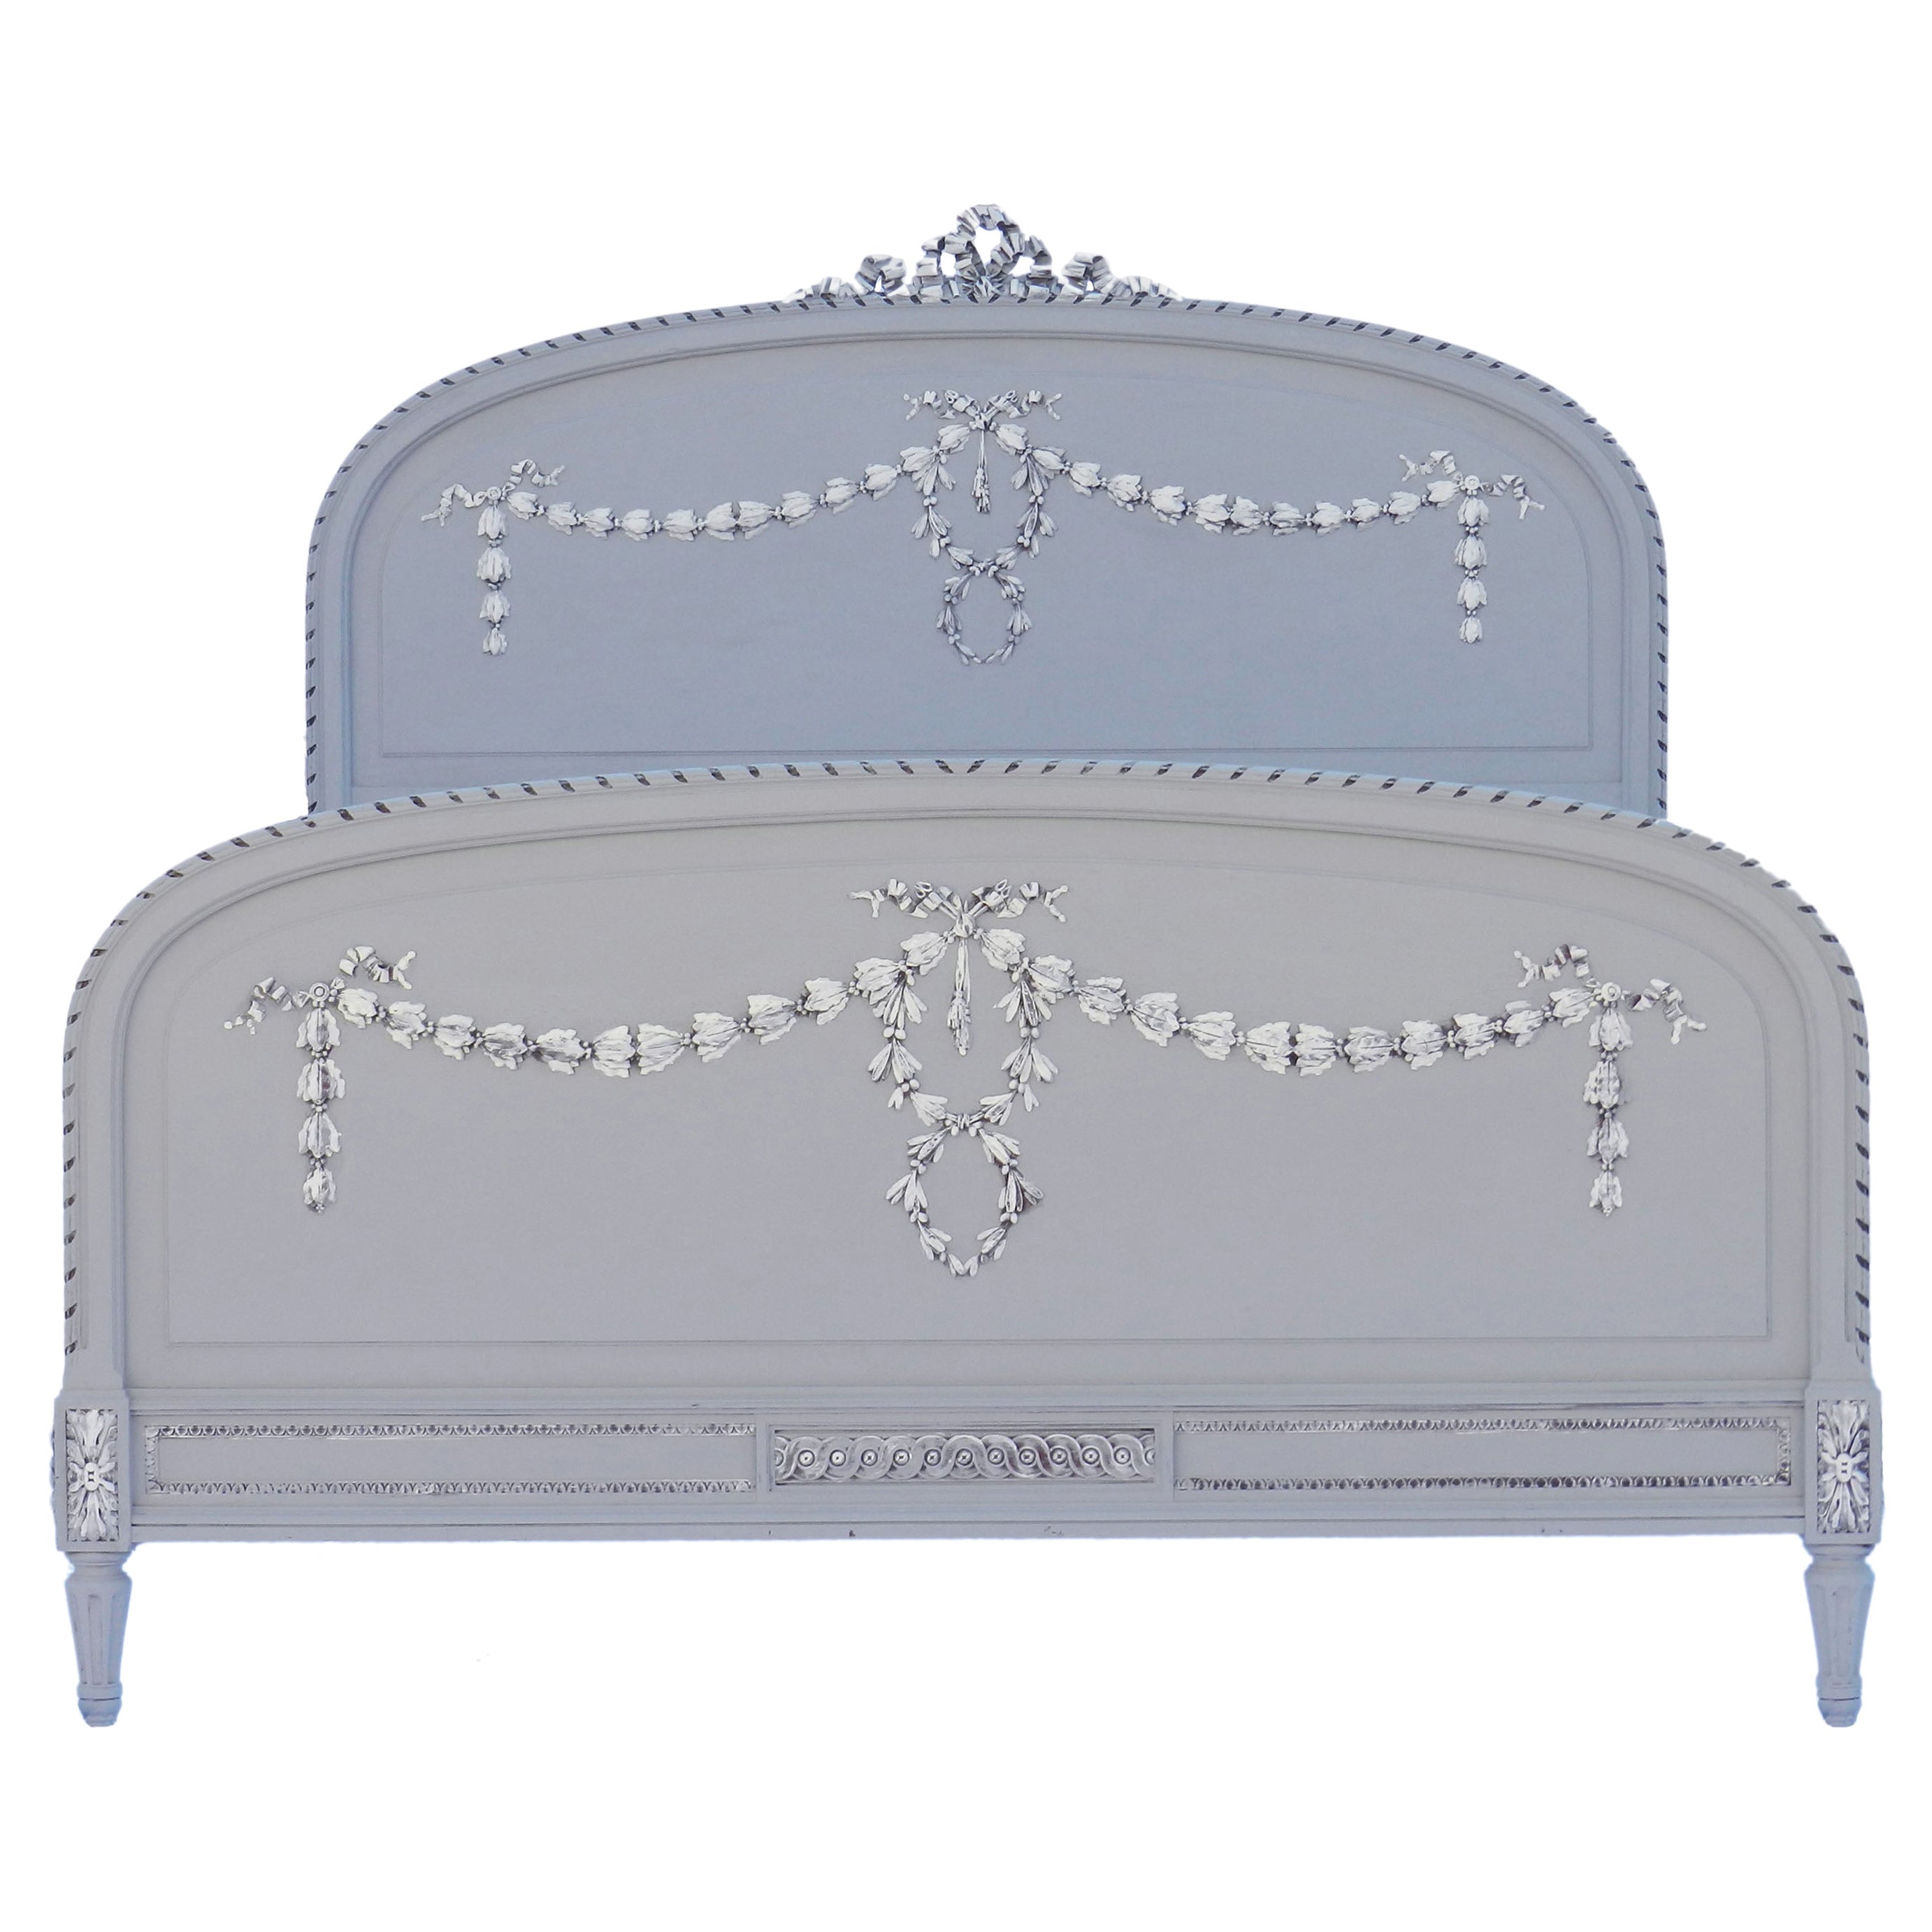 Antique French Bed Us Queen Uk King, Antique French Bed King Size